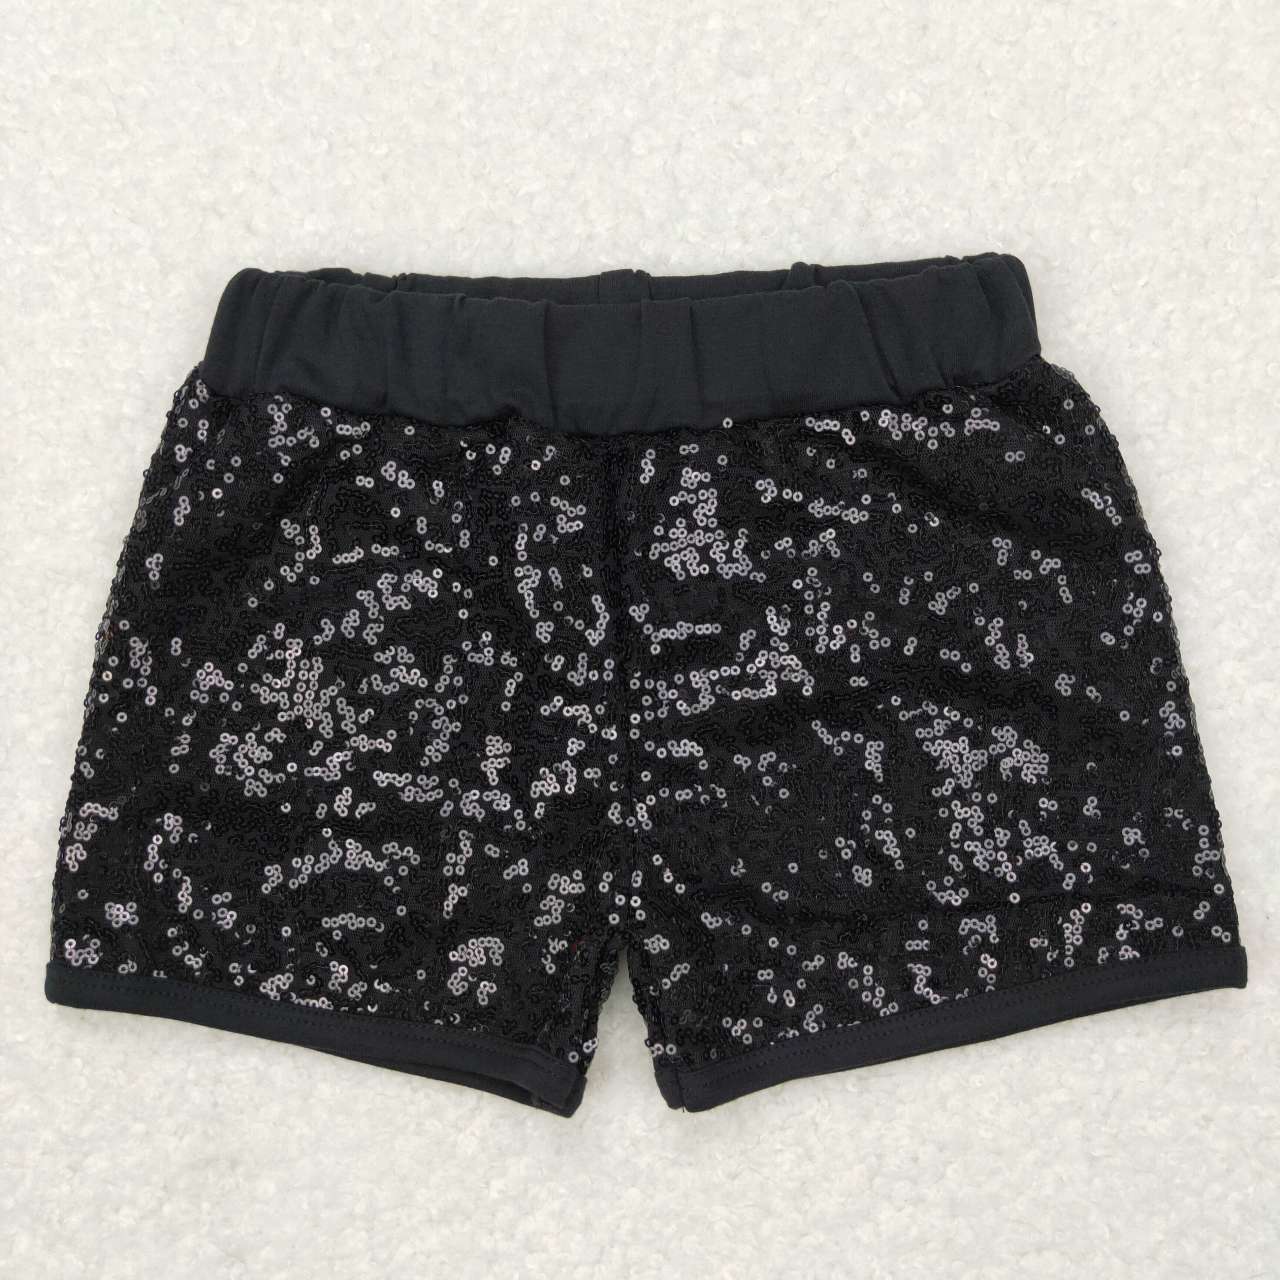 SS0121 Sequined Black Sparking Summer Shorts